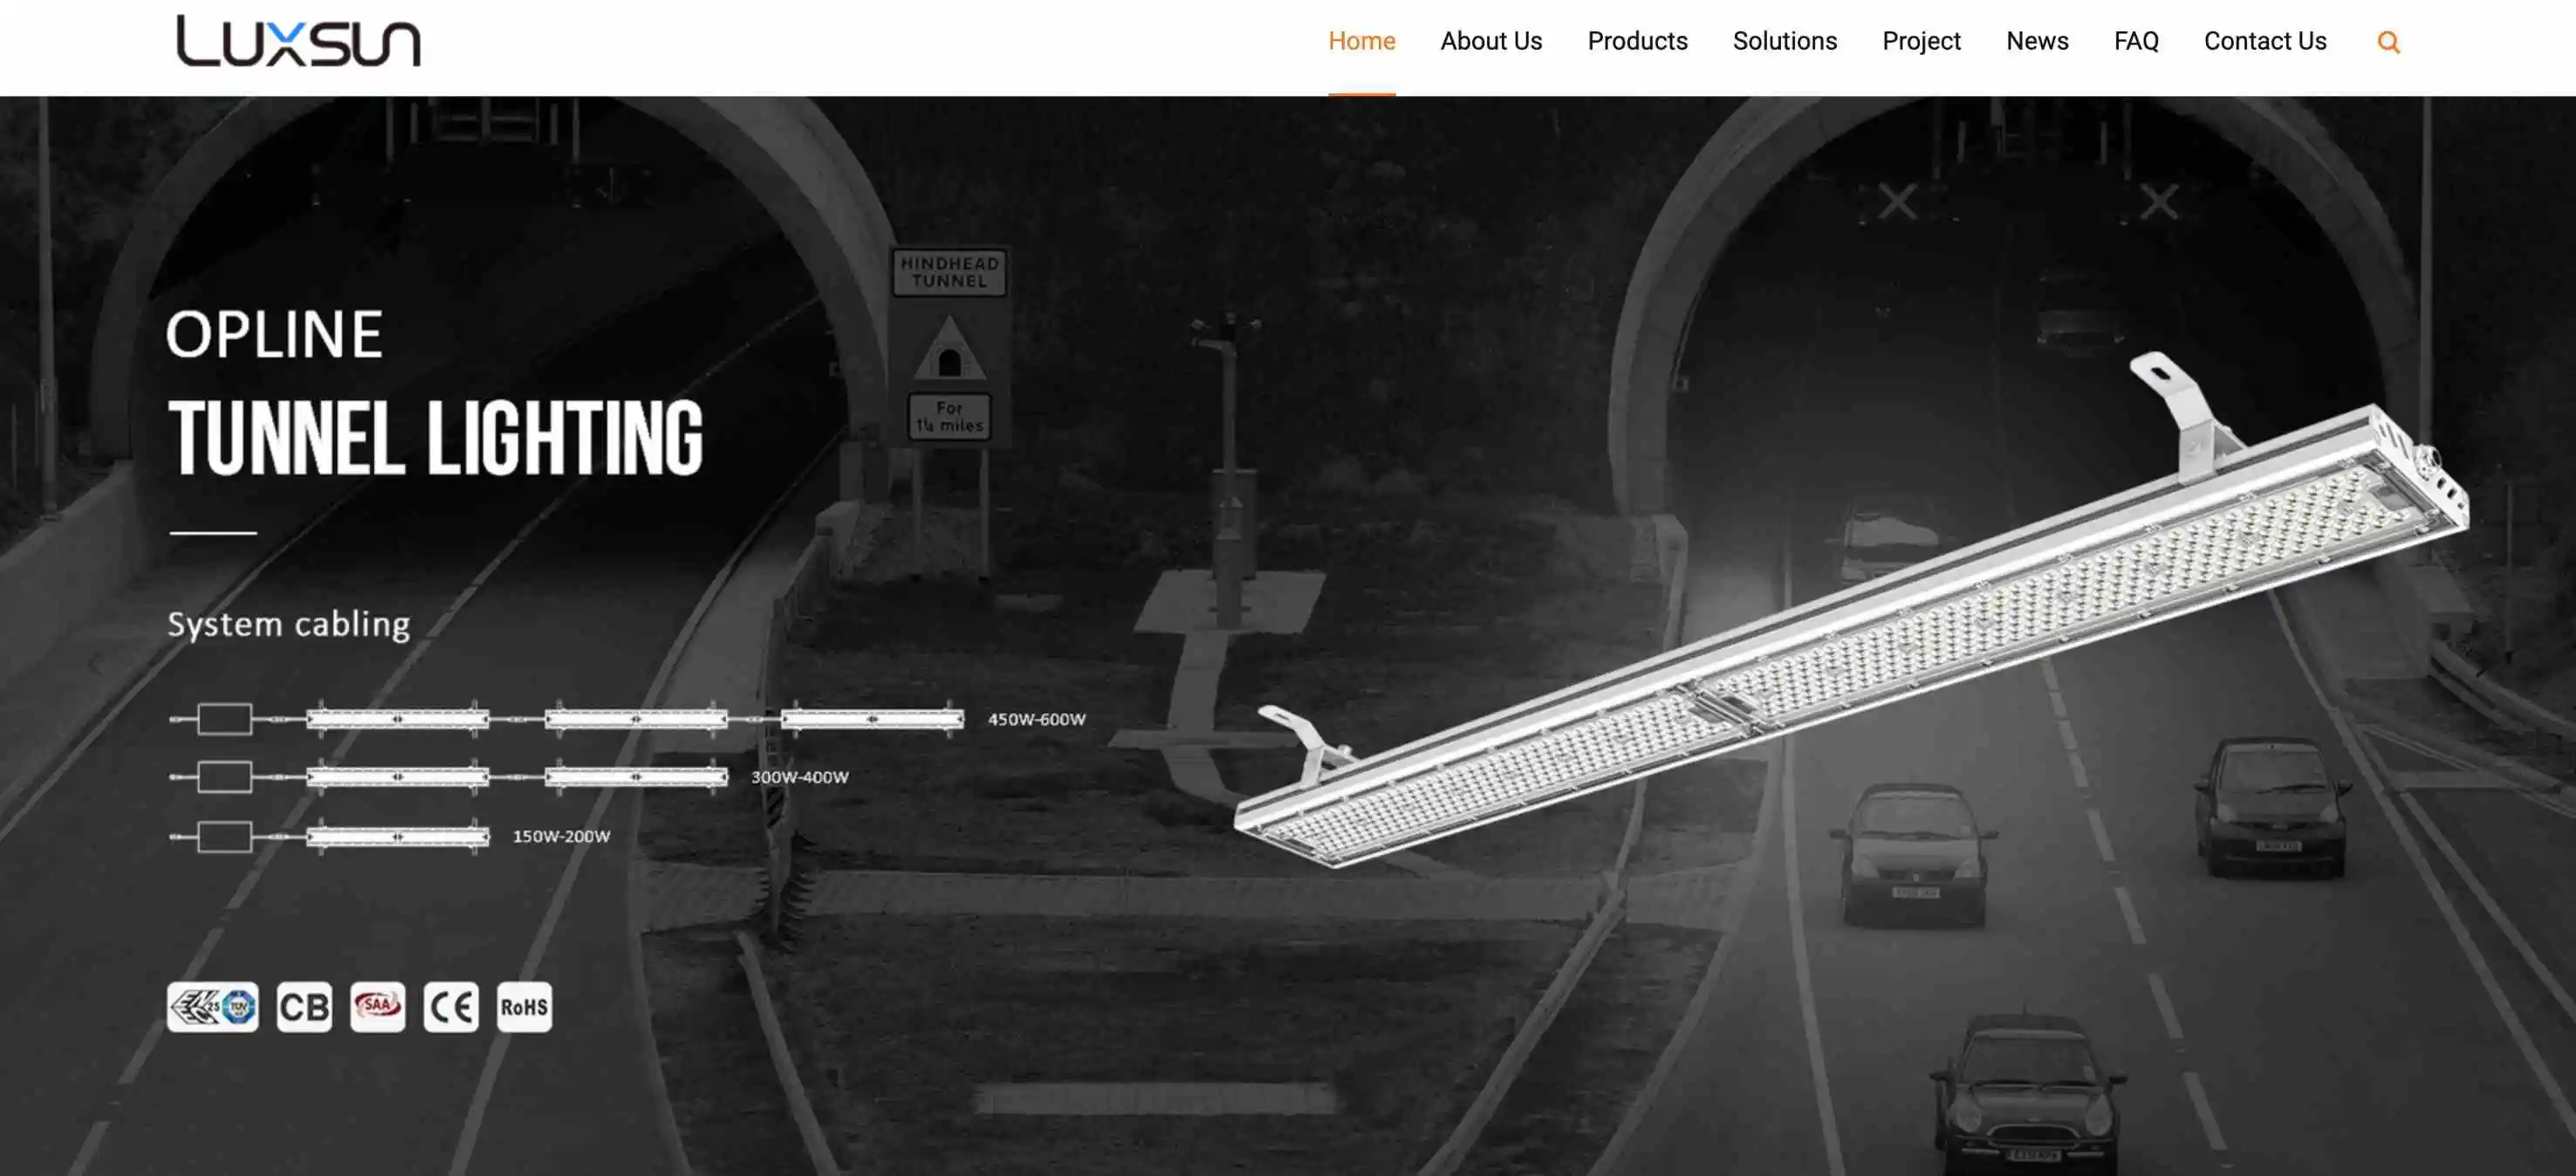 Website design for Luxsun Lighting showcasing tunnel lighting products and services